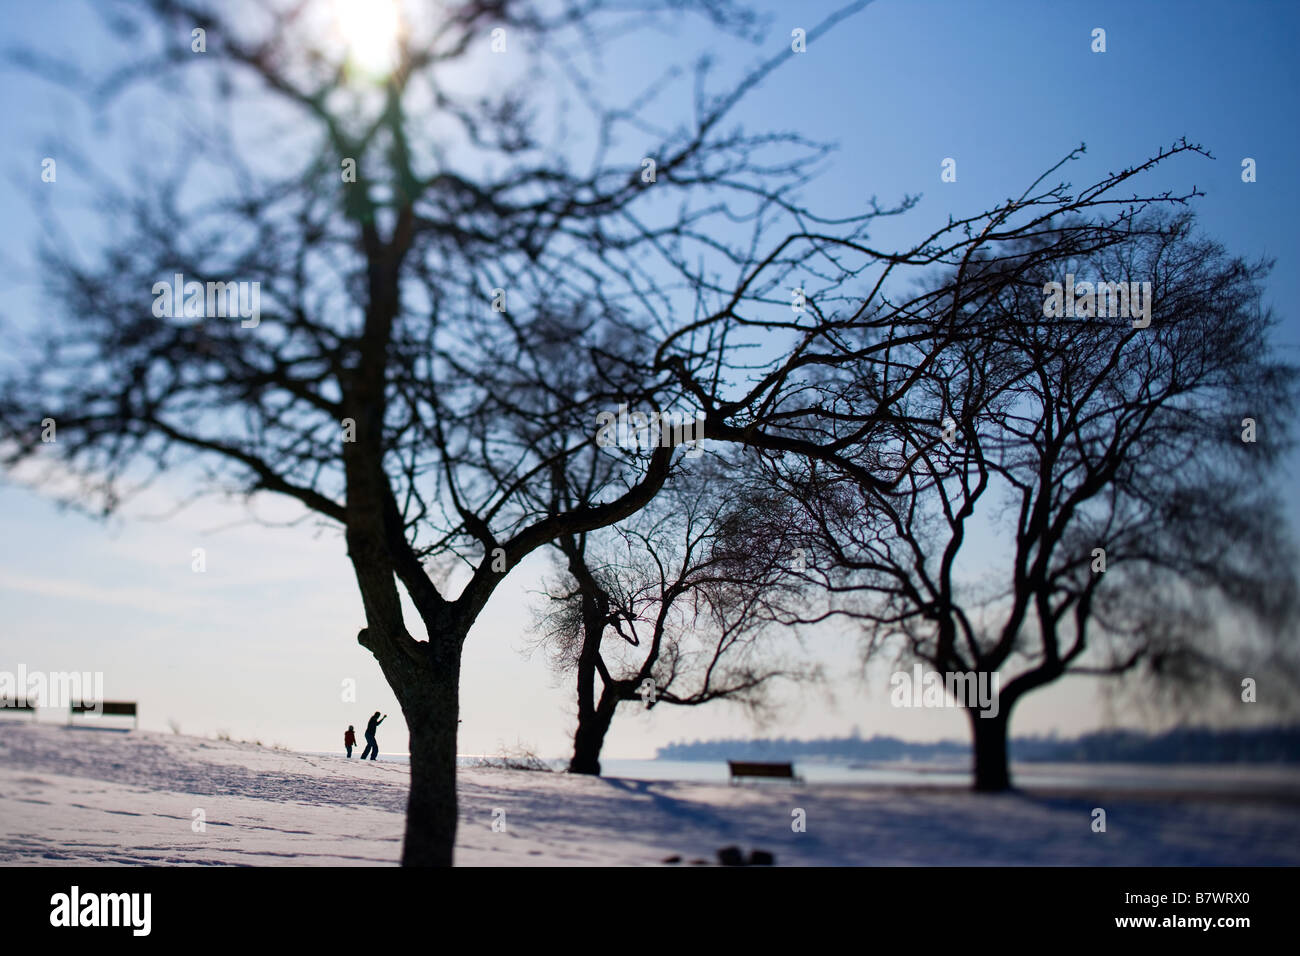 Trees in a park with a father and son skipping rocks in West Haven CT USA during the winter with snow Stock Photo